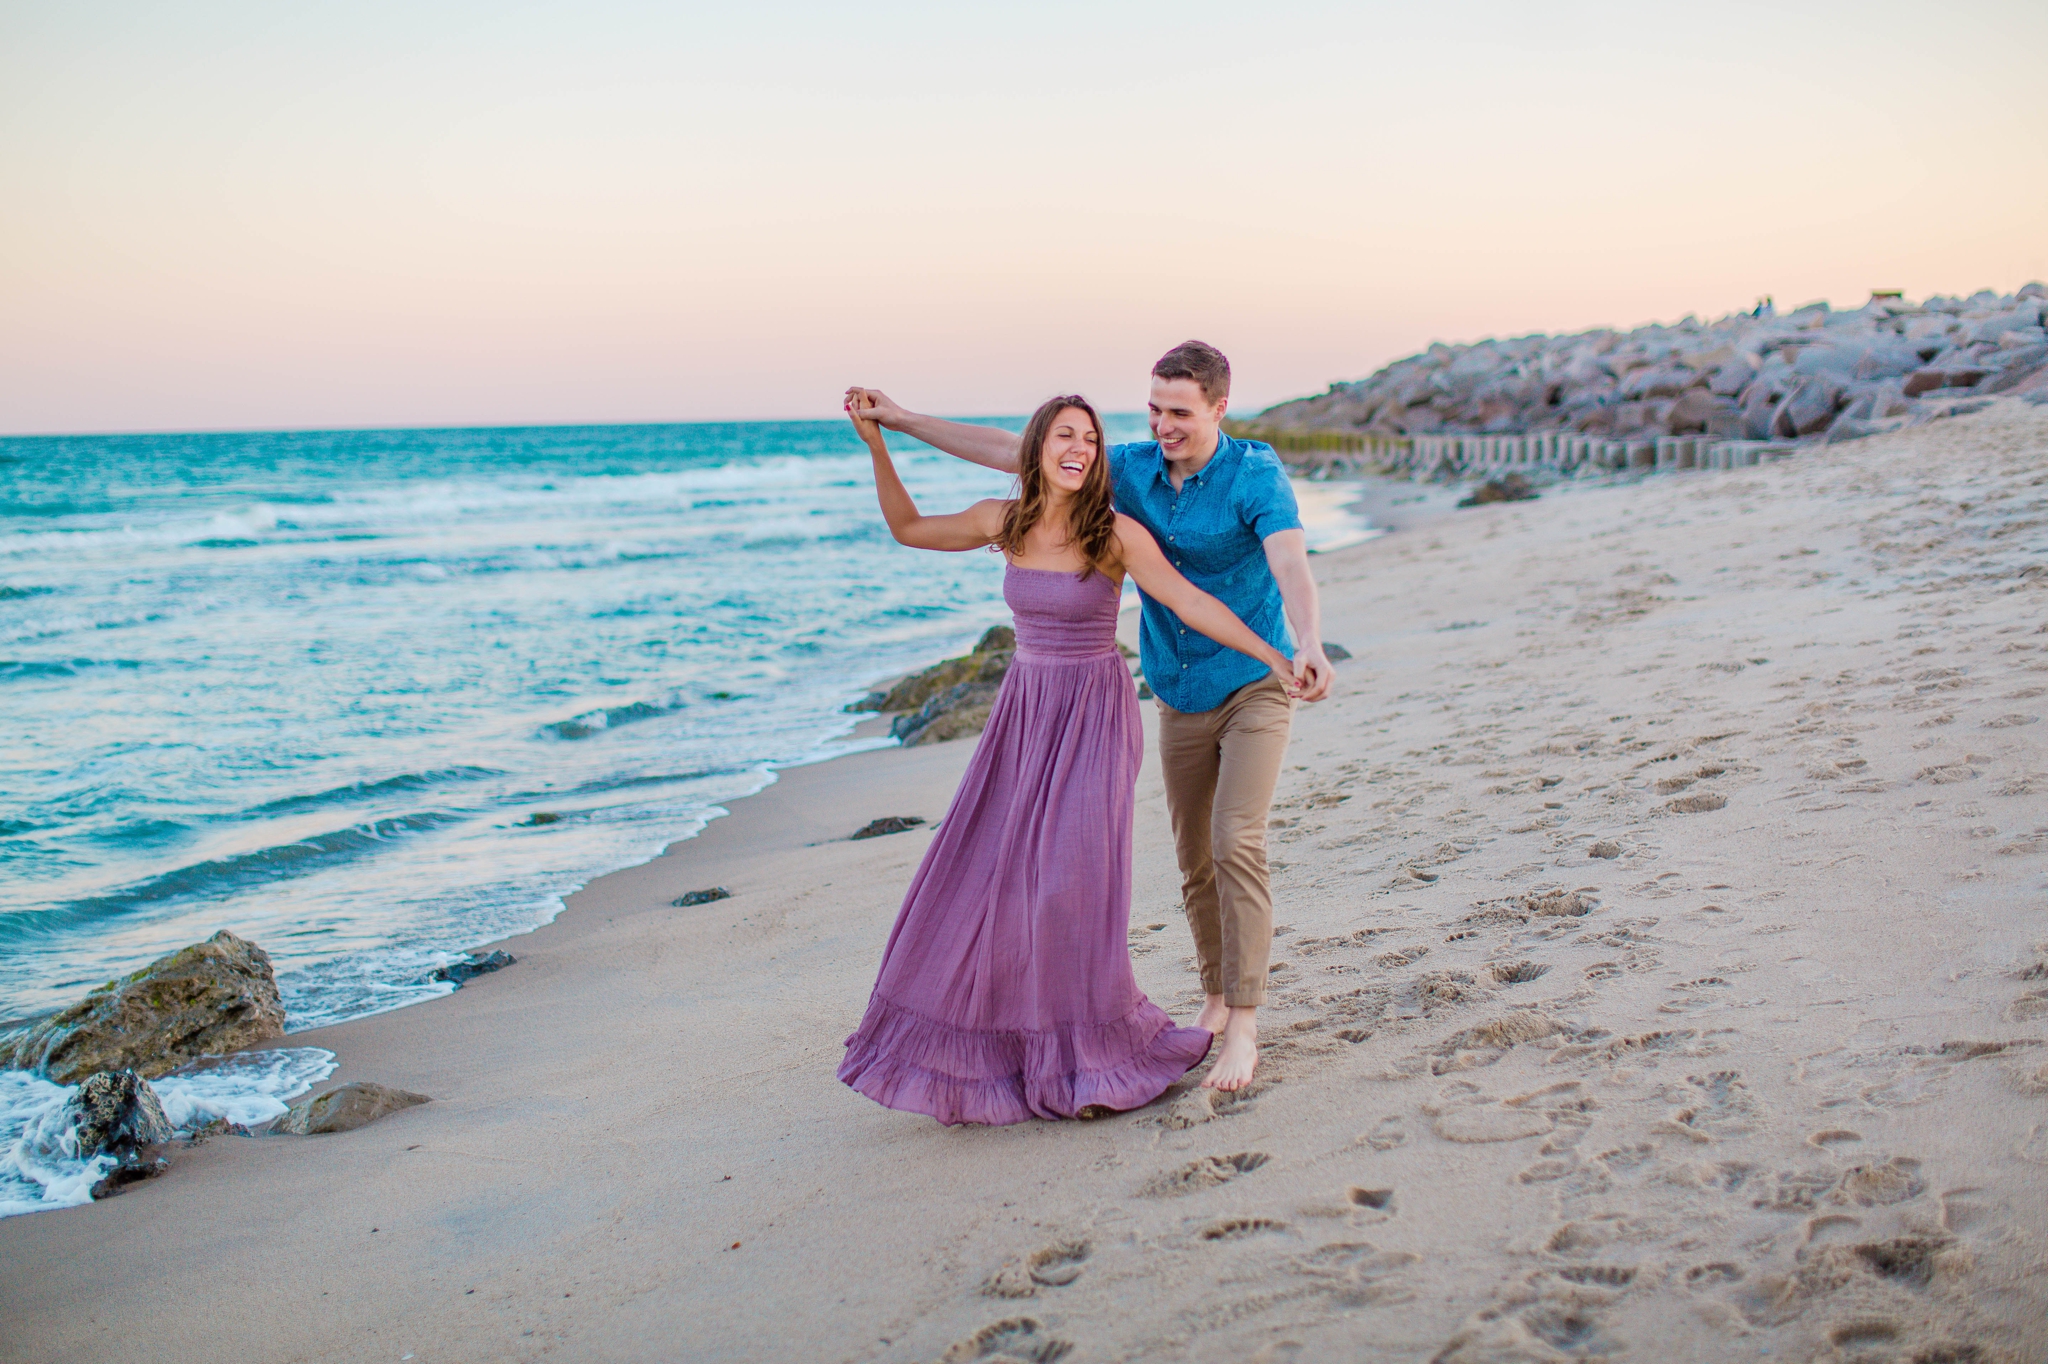  couple playing on the beach - Woman is in a flowy pastel maxi dress - candid and unposed golden light session - beach engagement photographer in honolulu, oahu, hawaii - johanna dye photography 